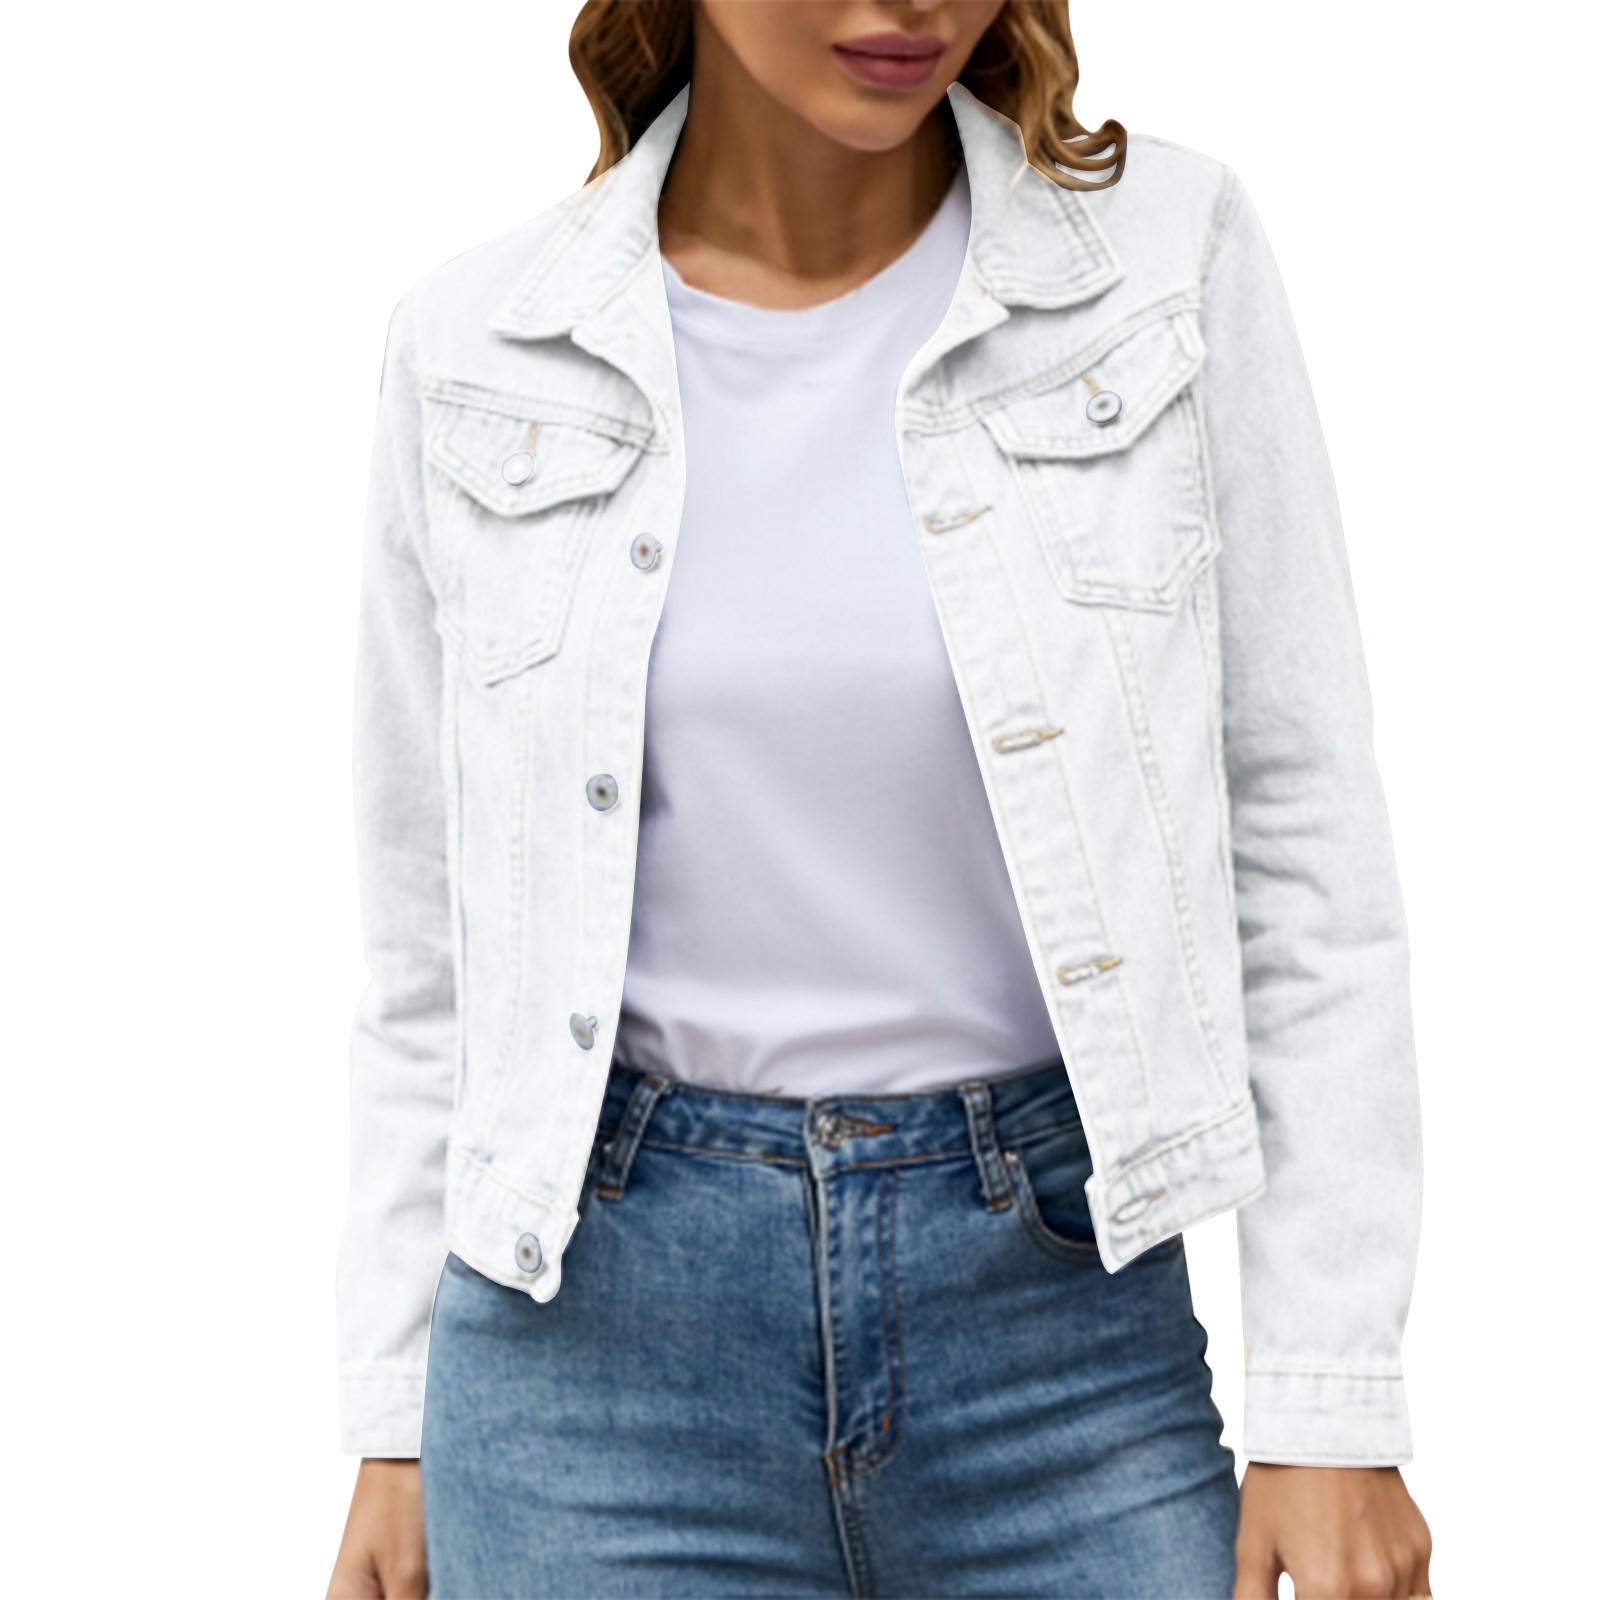 iOPQO womens sweaters Women's Basic Solid Color Button Down Denim Cotton Jacket With Pockets Denim Jacket Coat Women's Denim Jackets White XL - image 3 of 8